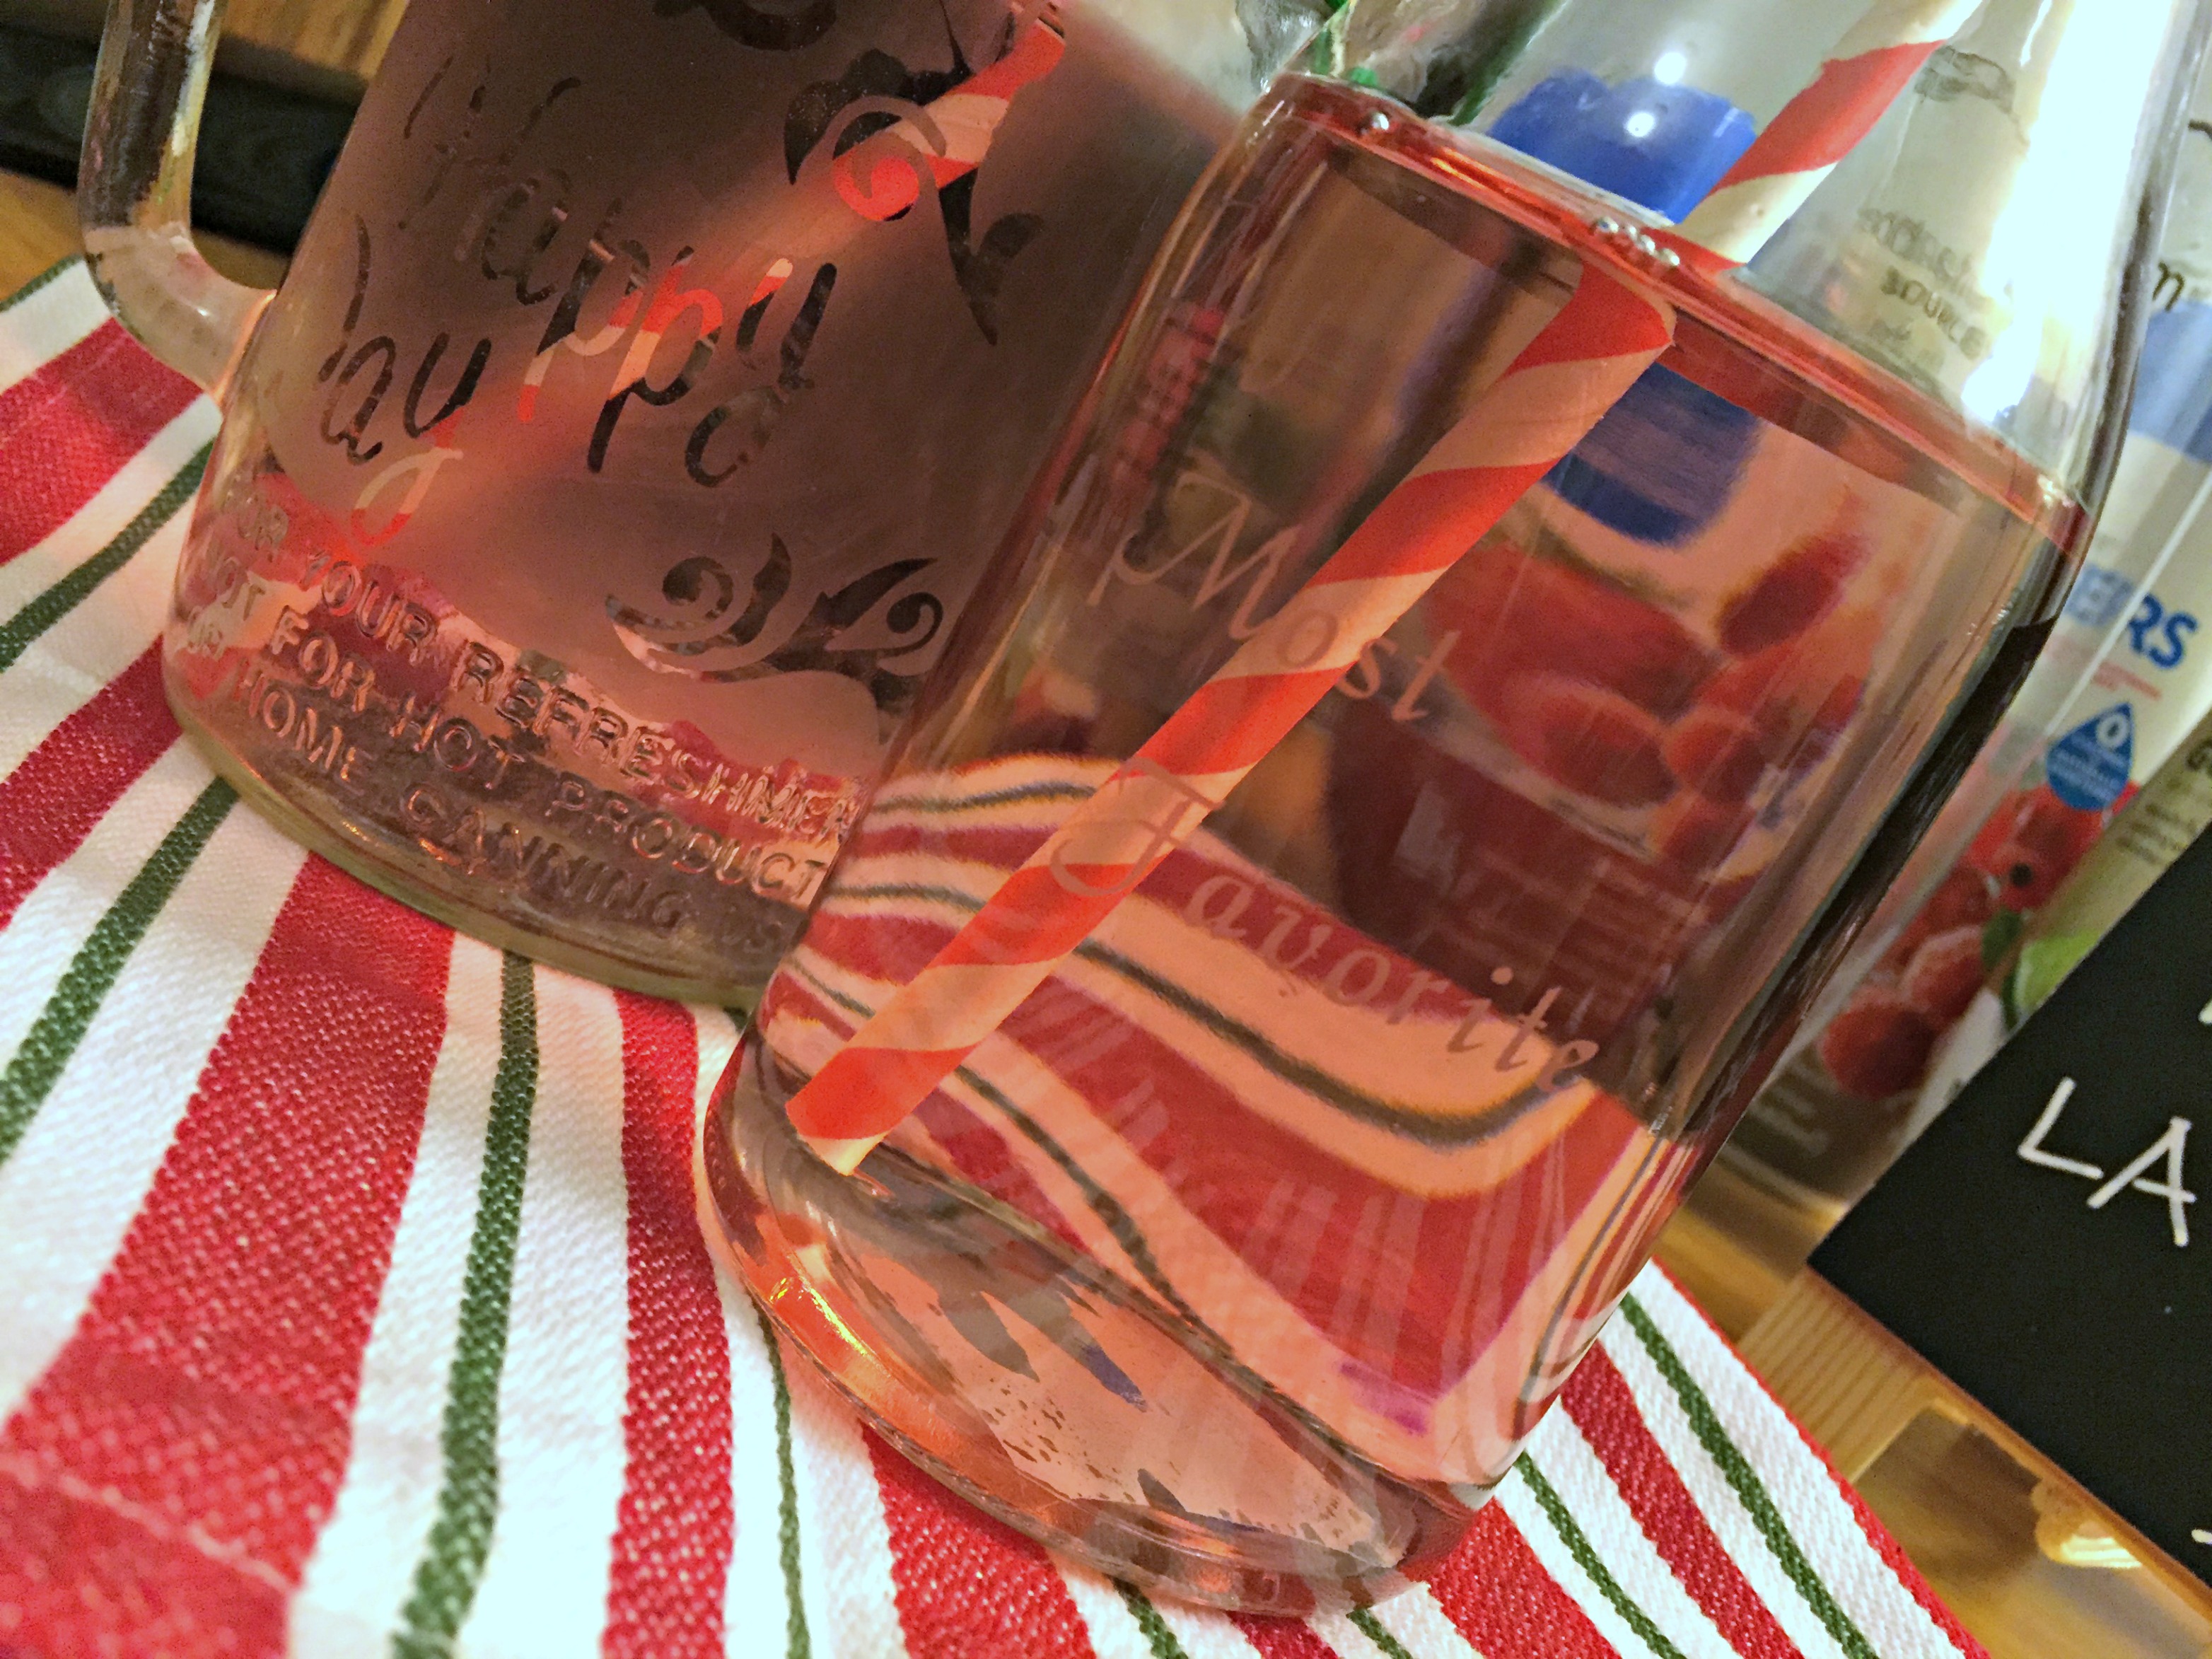 Make your own Personalized Glasses #WaterMadeExciting #CollectiveBias